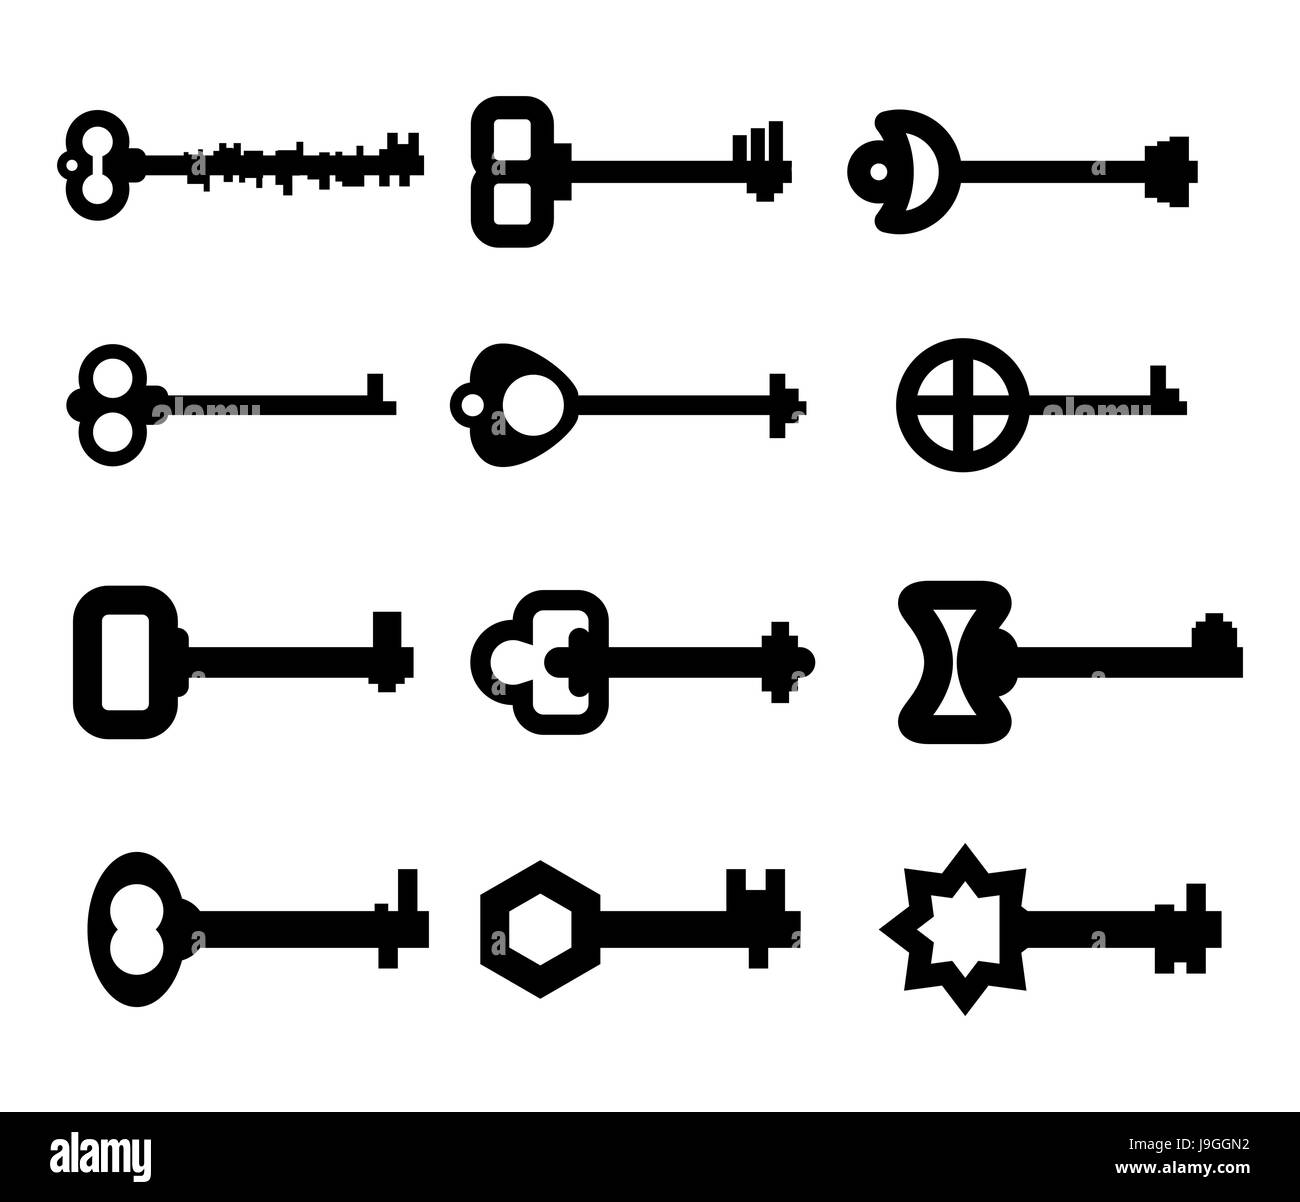 Set of hand drawn antique keys with lock. Stock Vector by ©goldenshrimp  180810474